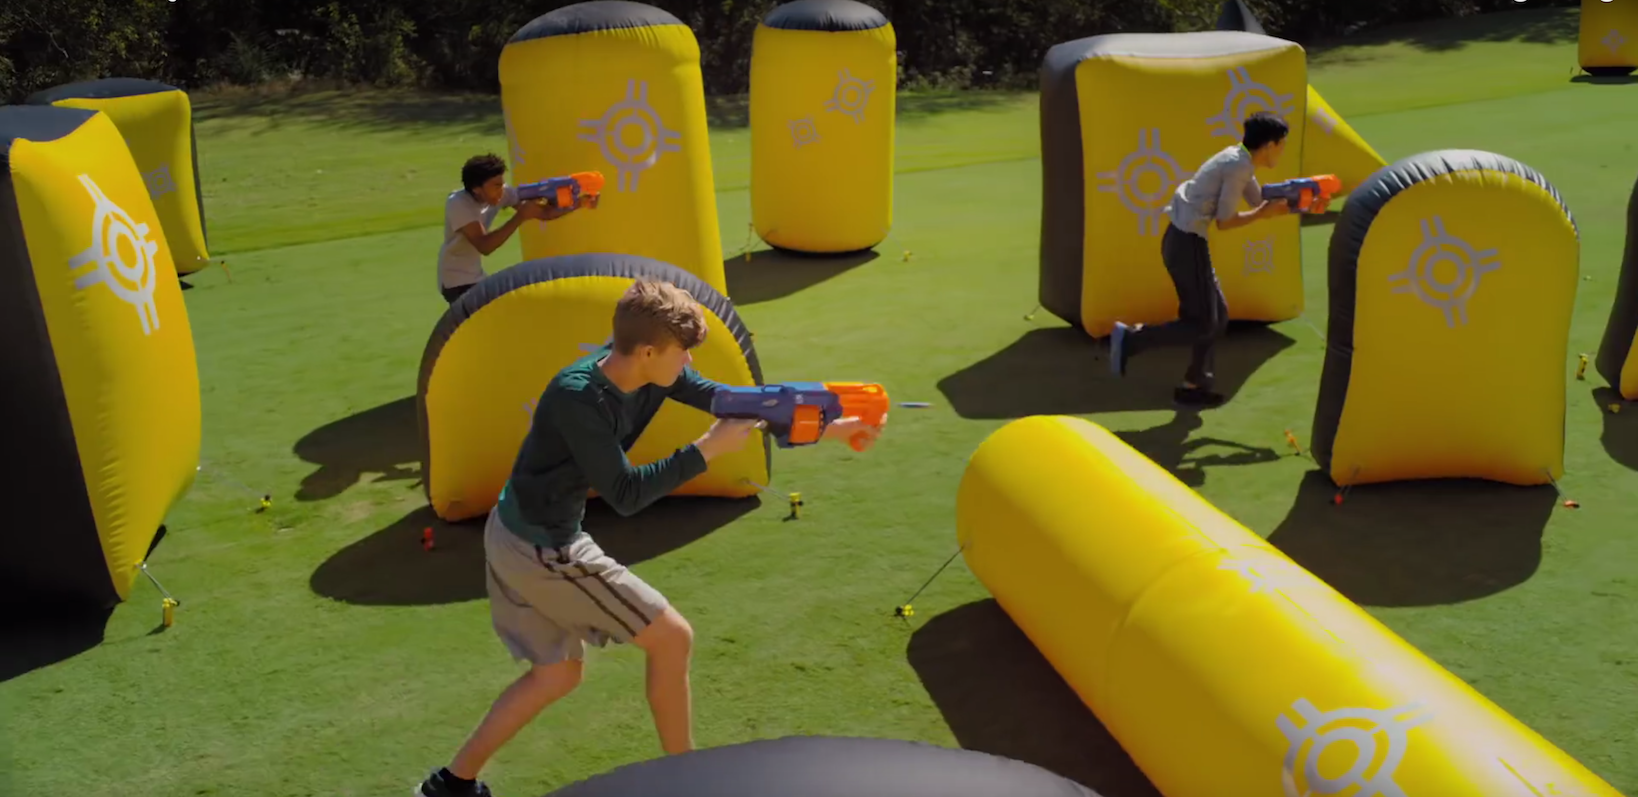 nerf inflatable